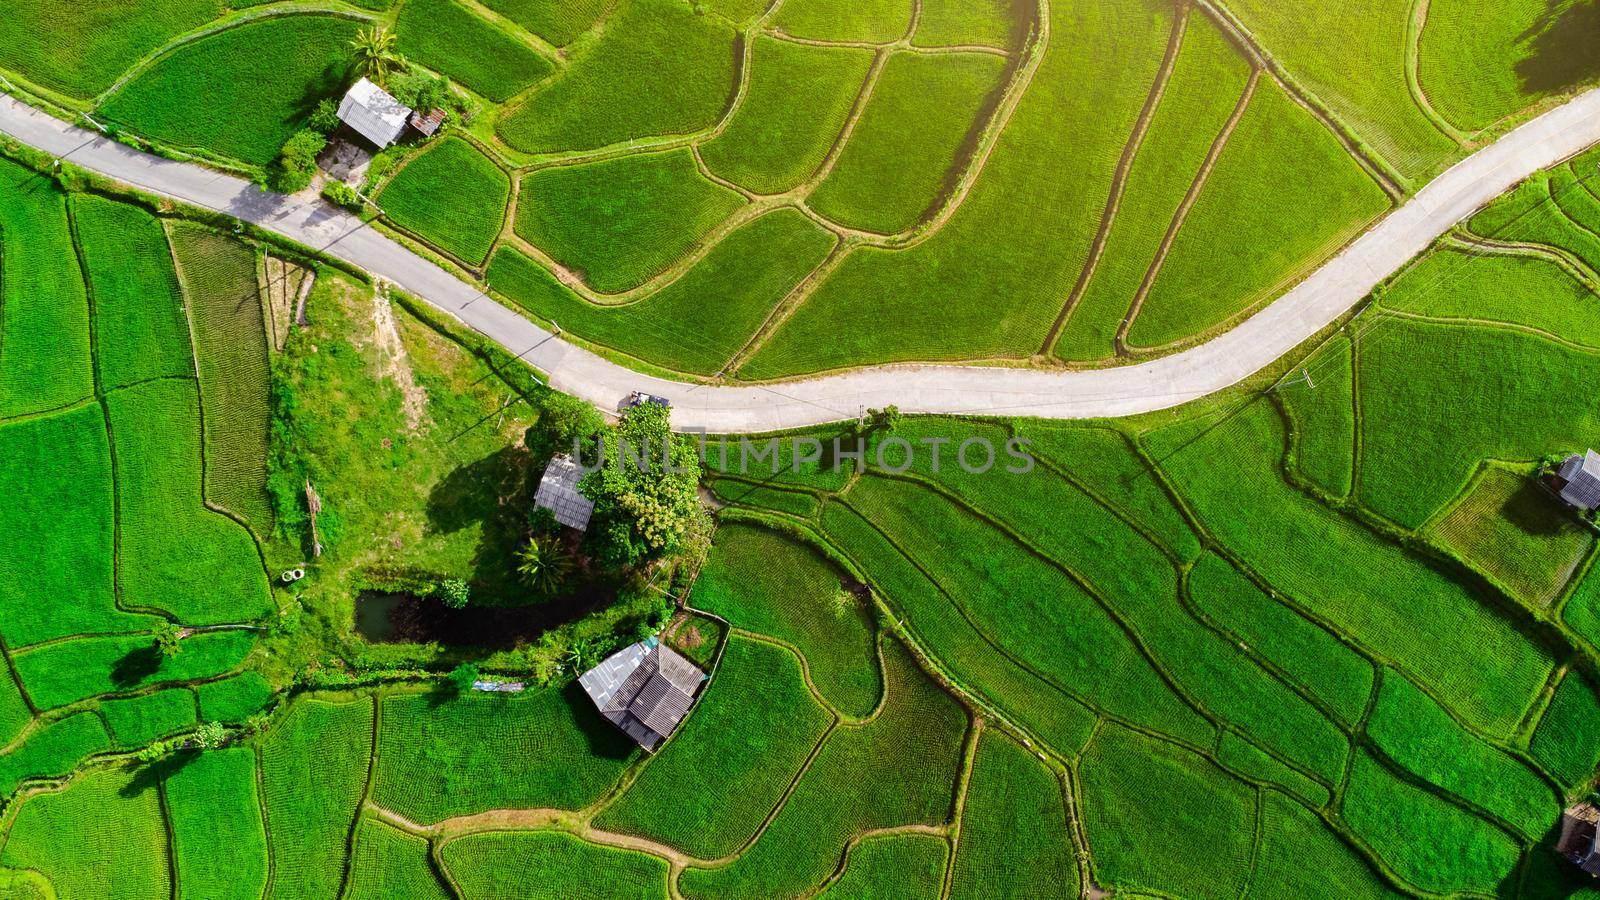 aerial view, agricultural, agriculture, asia, background, beautiful, conservation, countryside, cultivation, culture, ecology, environment, farm, farmland, field, flying, food, forest, grass, green, hill, hut, landscape, meadow, mountain, natural, nature, organic, outdoor, paddy, plant, plantation, rice, rural, scenery, scenic, sky, spring, summer, sunlight, sunny, terrace, thailand, tourism, travel, tree, tropical, vacation, valley, village by TEERASAK